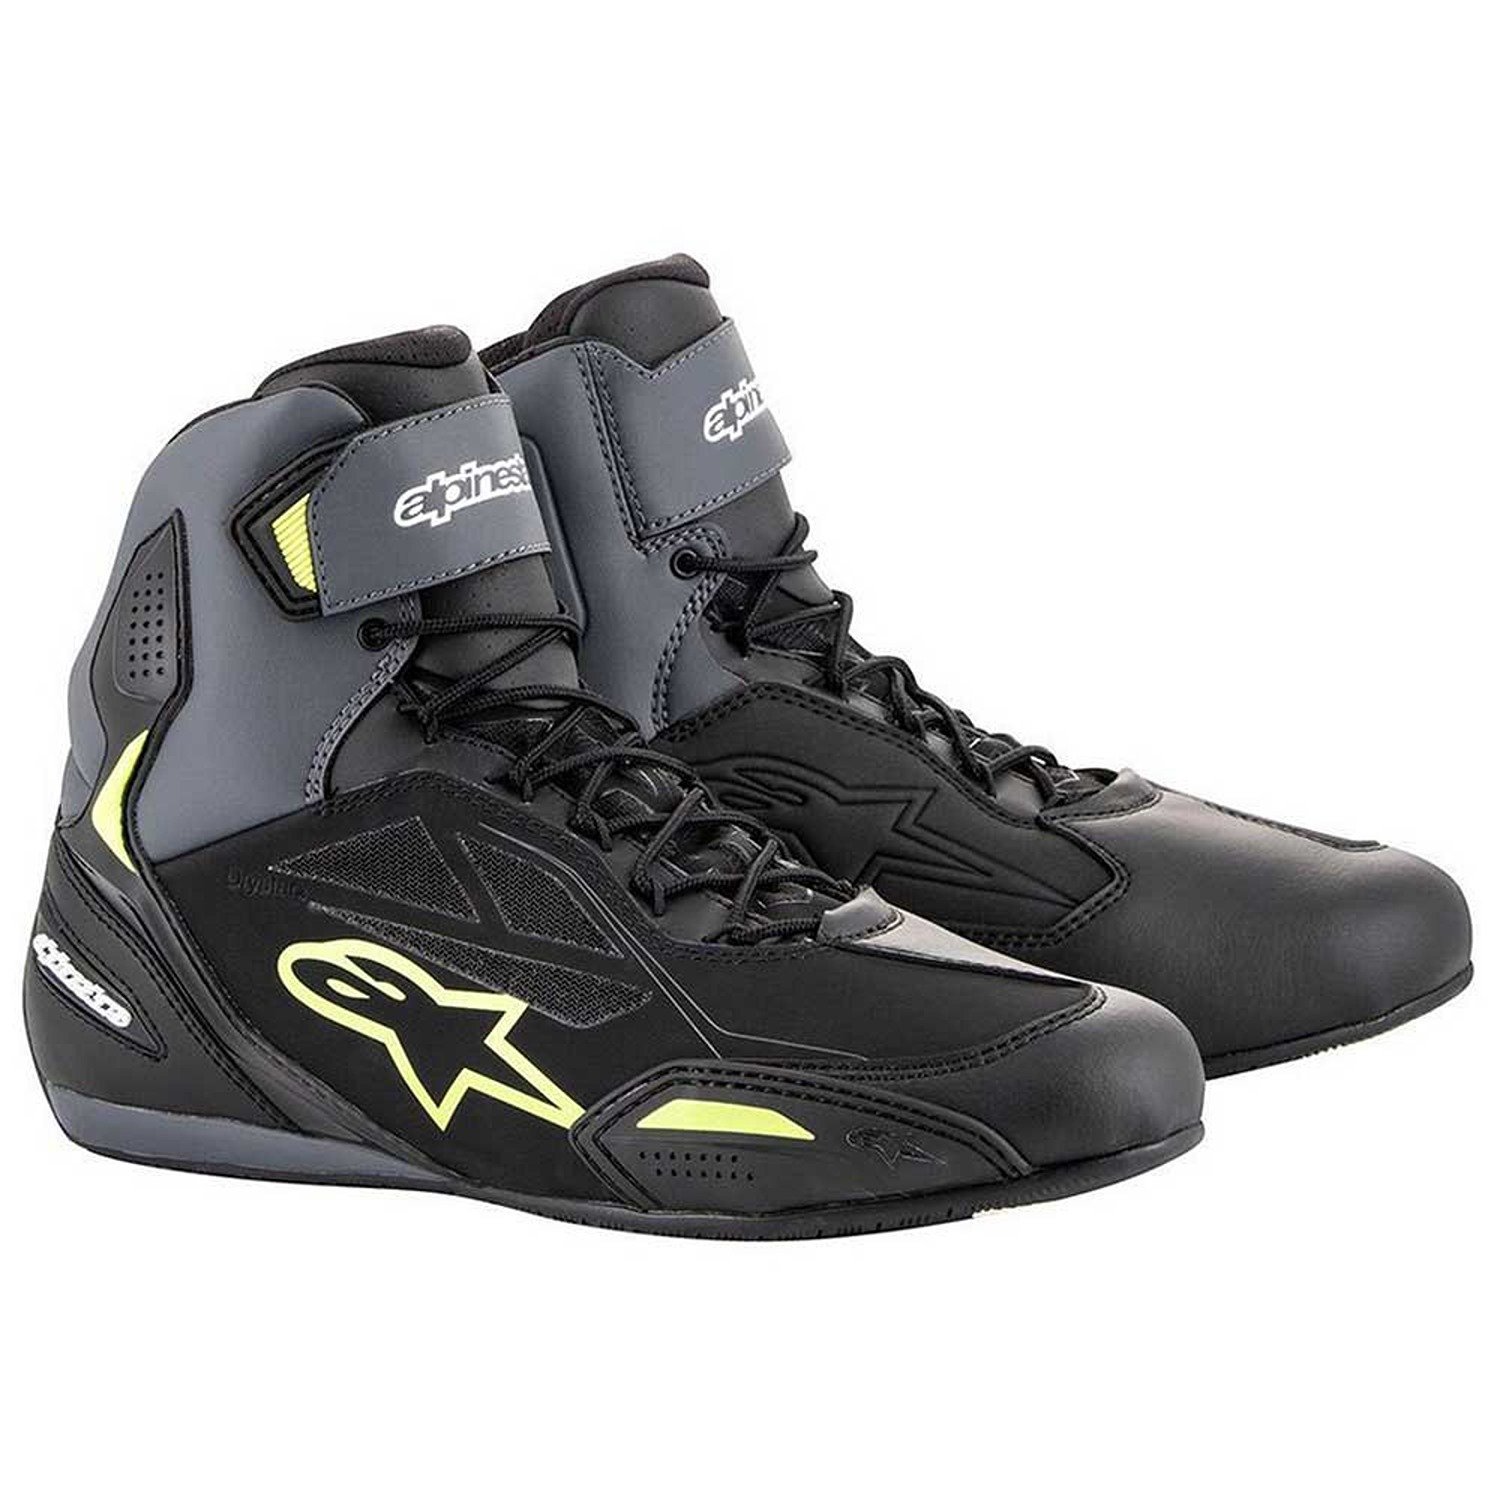 Image of Alpinestars Faster-3 Shoes Black Yellow Fluo Größe US 13